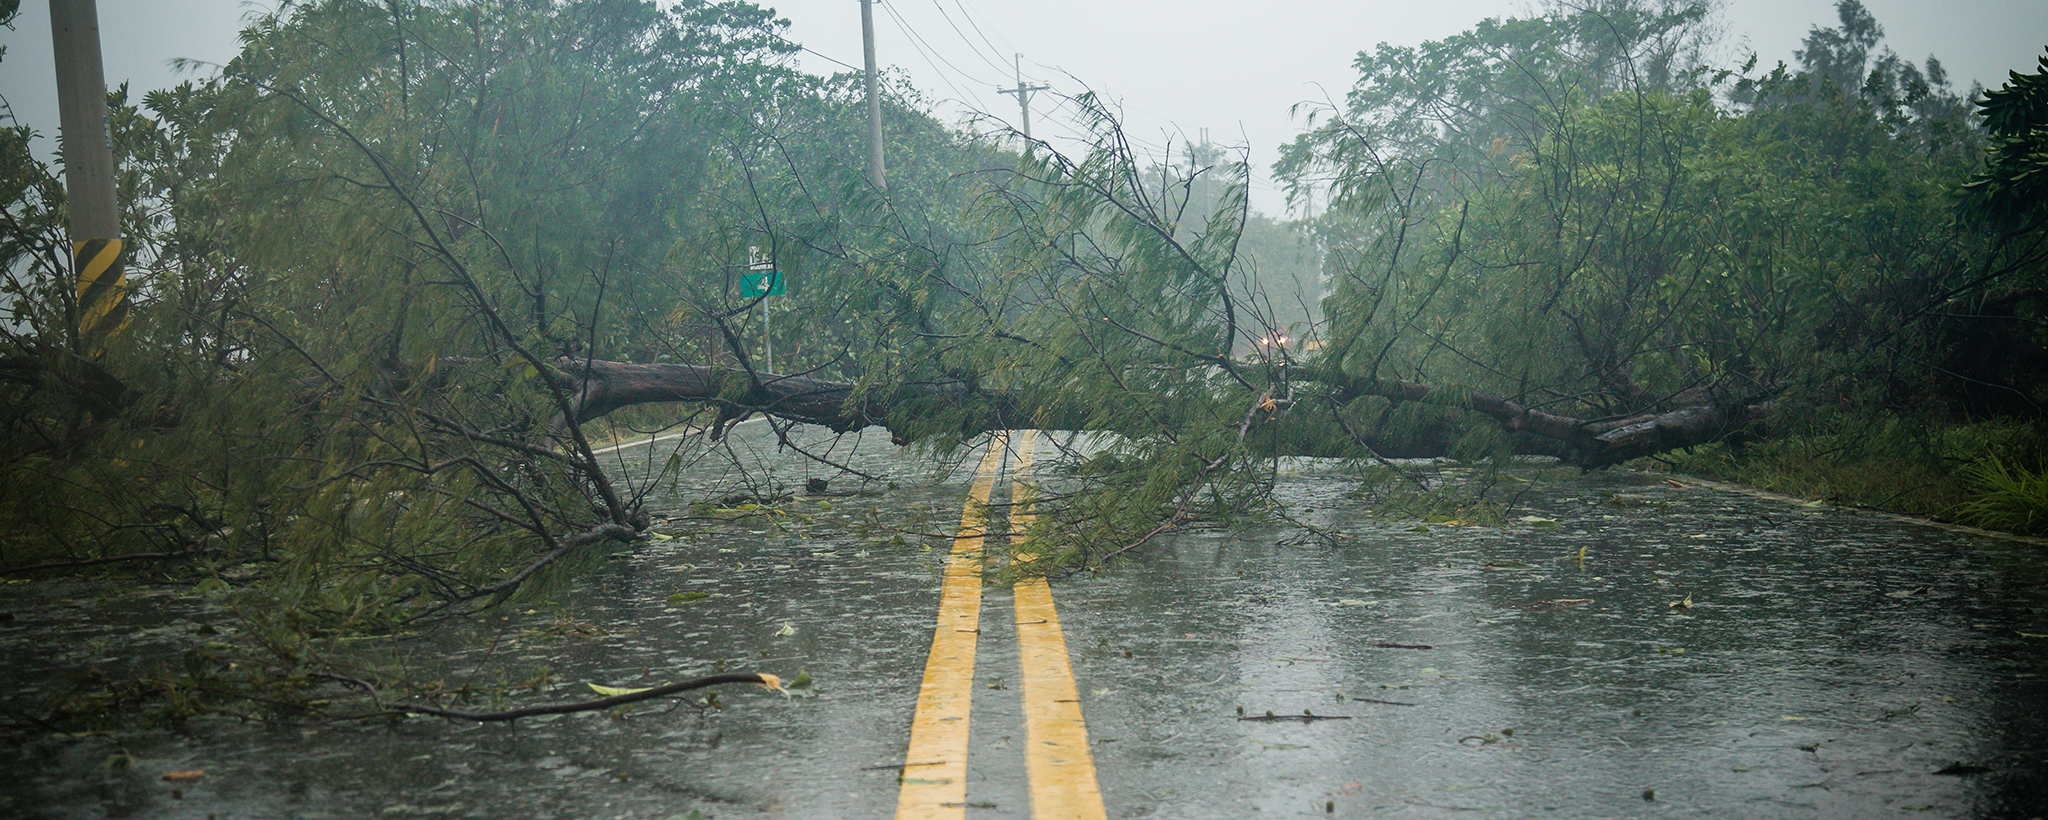 a downed tree on a rainy road